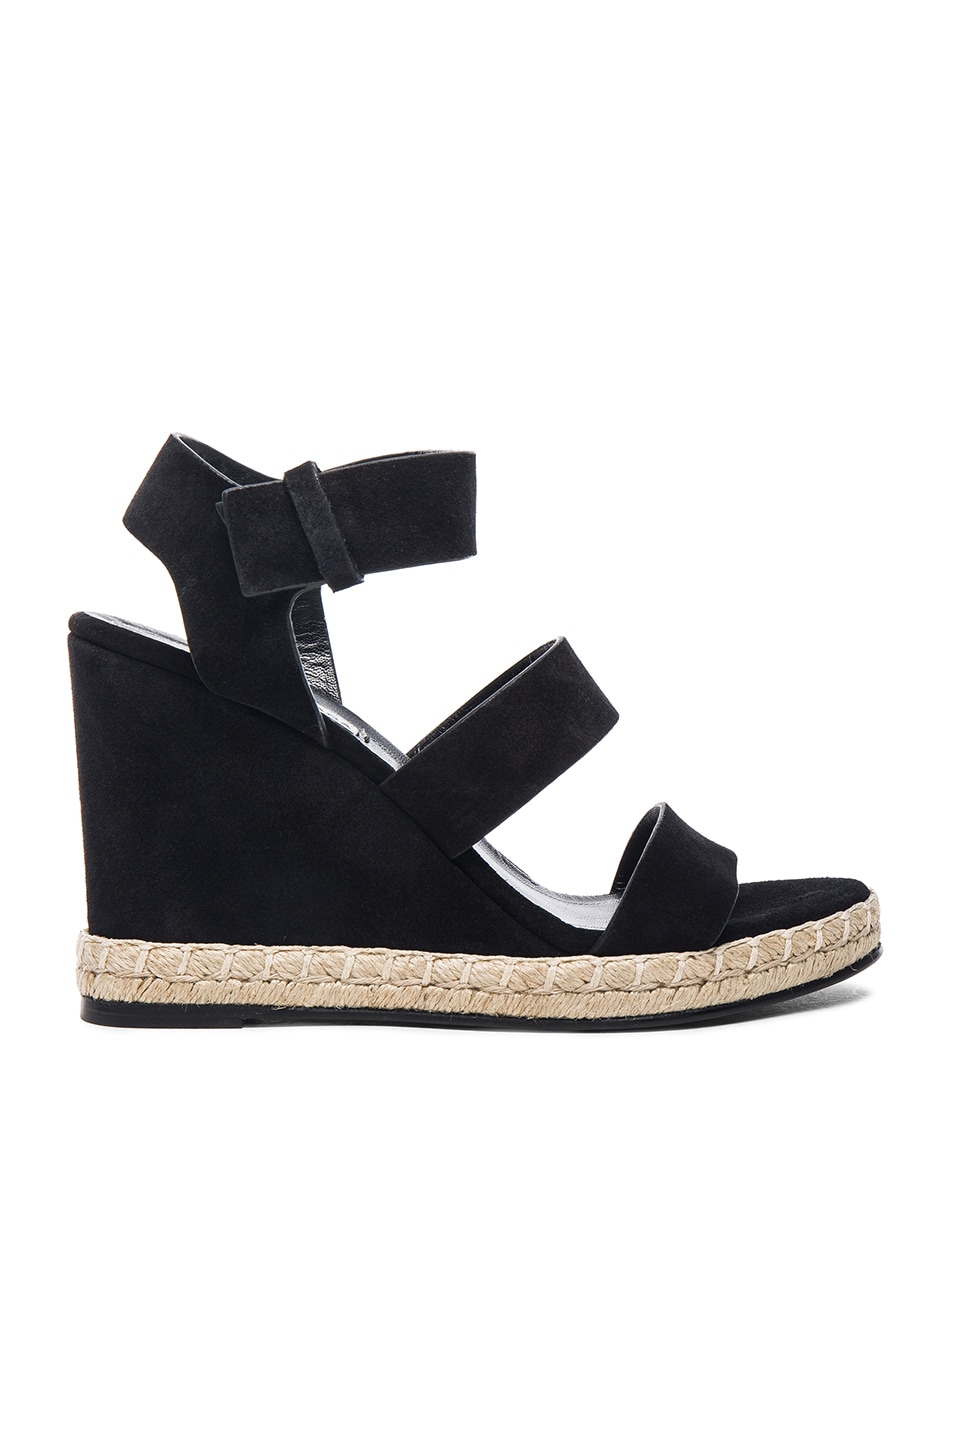 Image 1 of Balenciaga Suede Wedge Sandals in Black